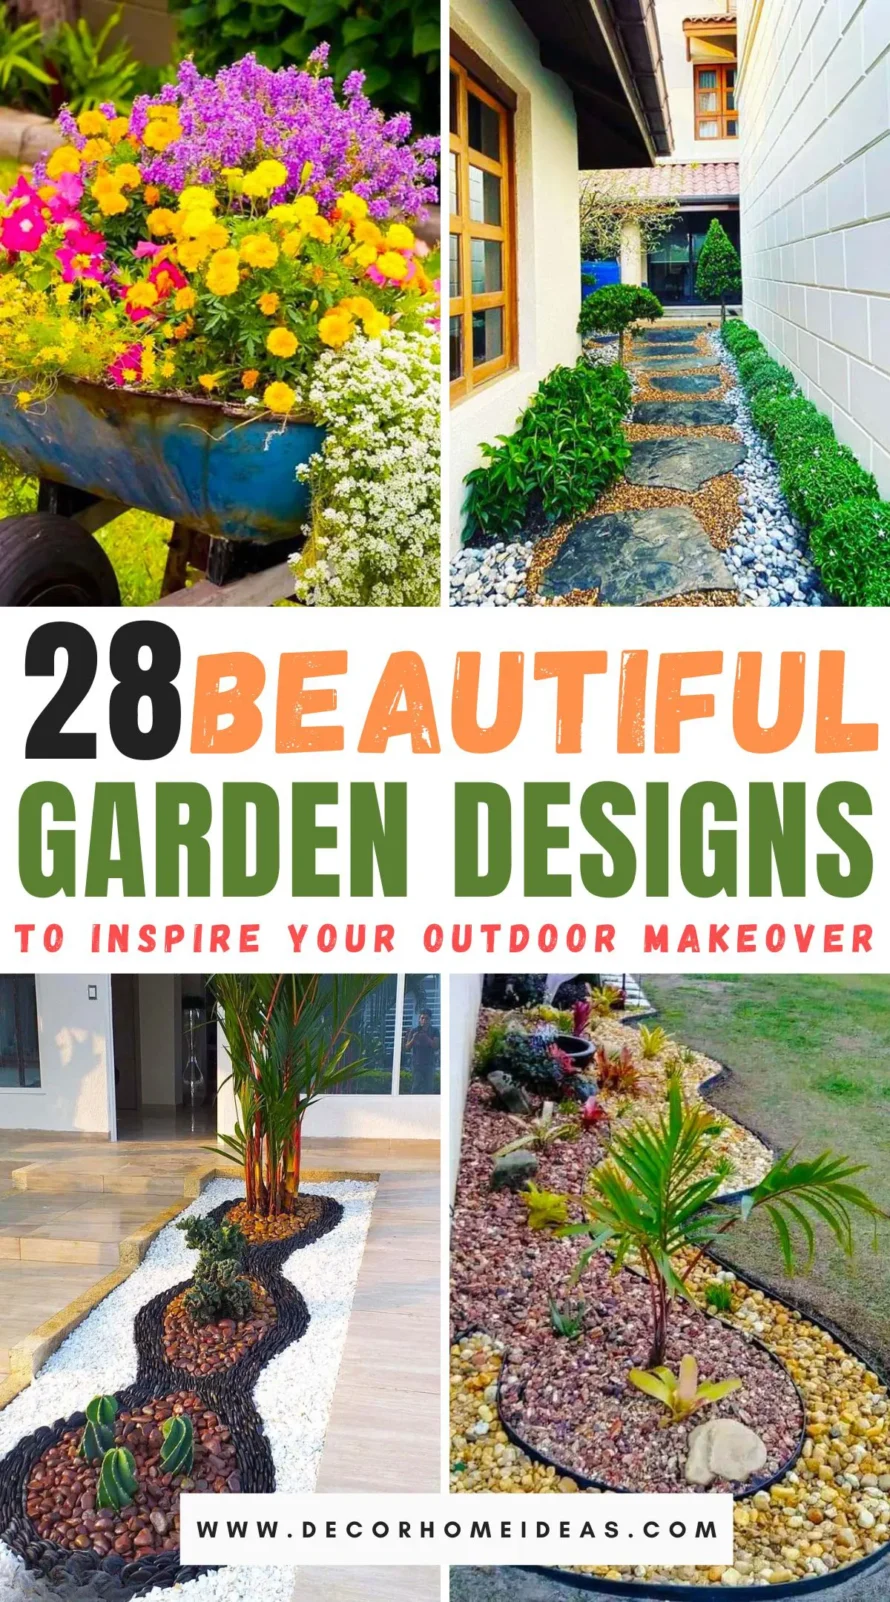 Explore 28 gorgeous garden designs that will inspire your next outdoor makeover. Whether you're looking for a tranquil retreat or a vibrant floral display, these ideas will help you craft a beautiful and functional outdoor space. Get ready to turn your garden dreams into reality!